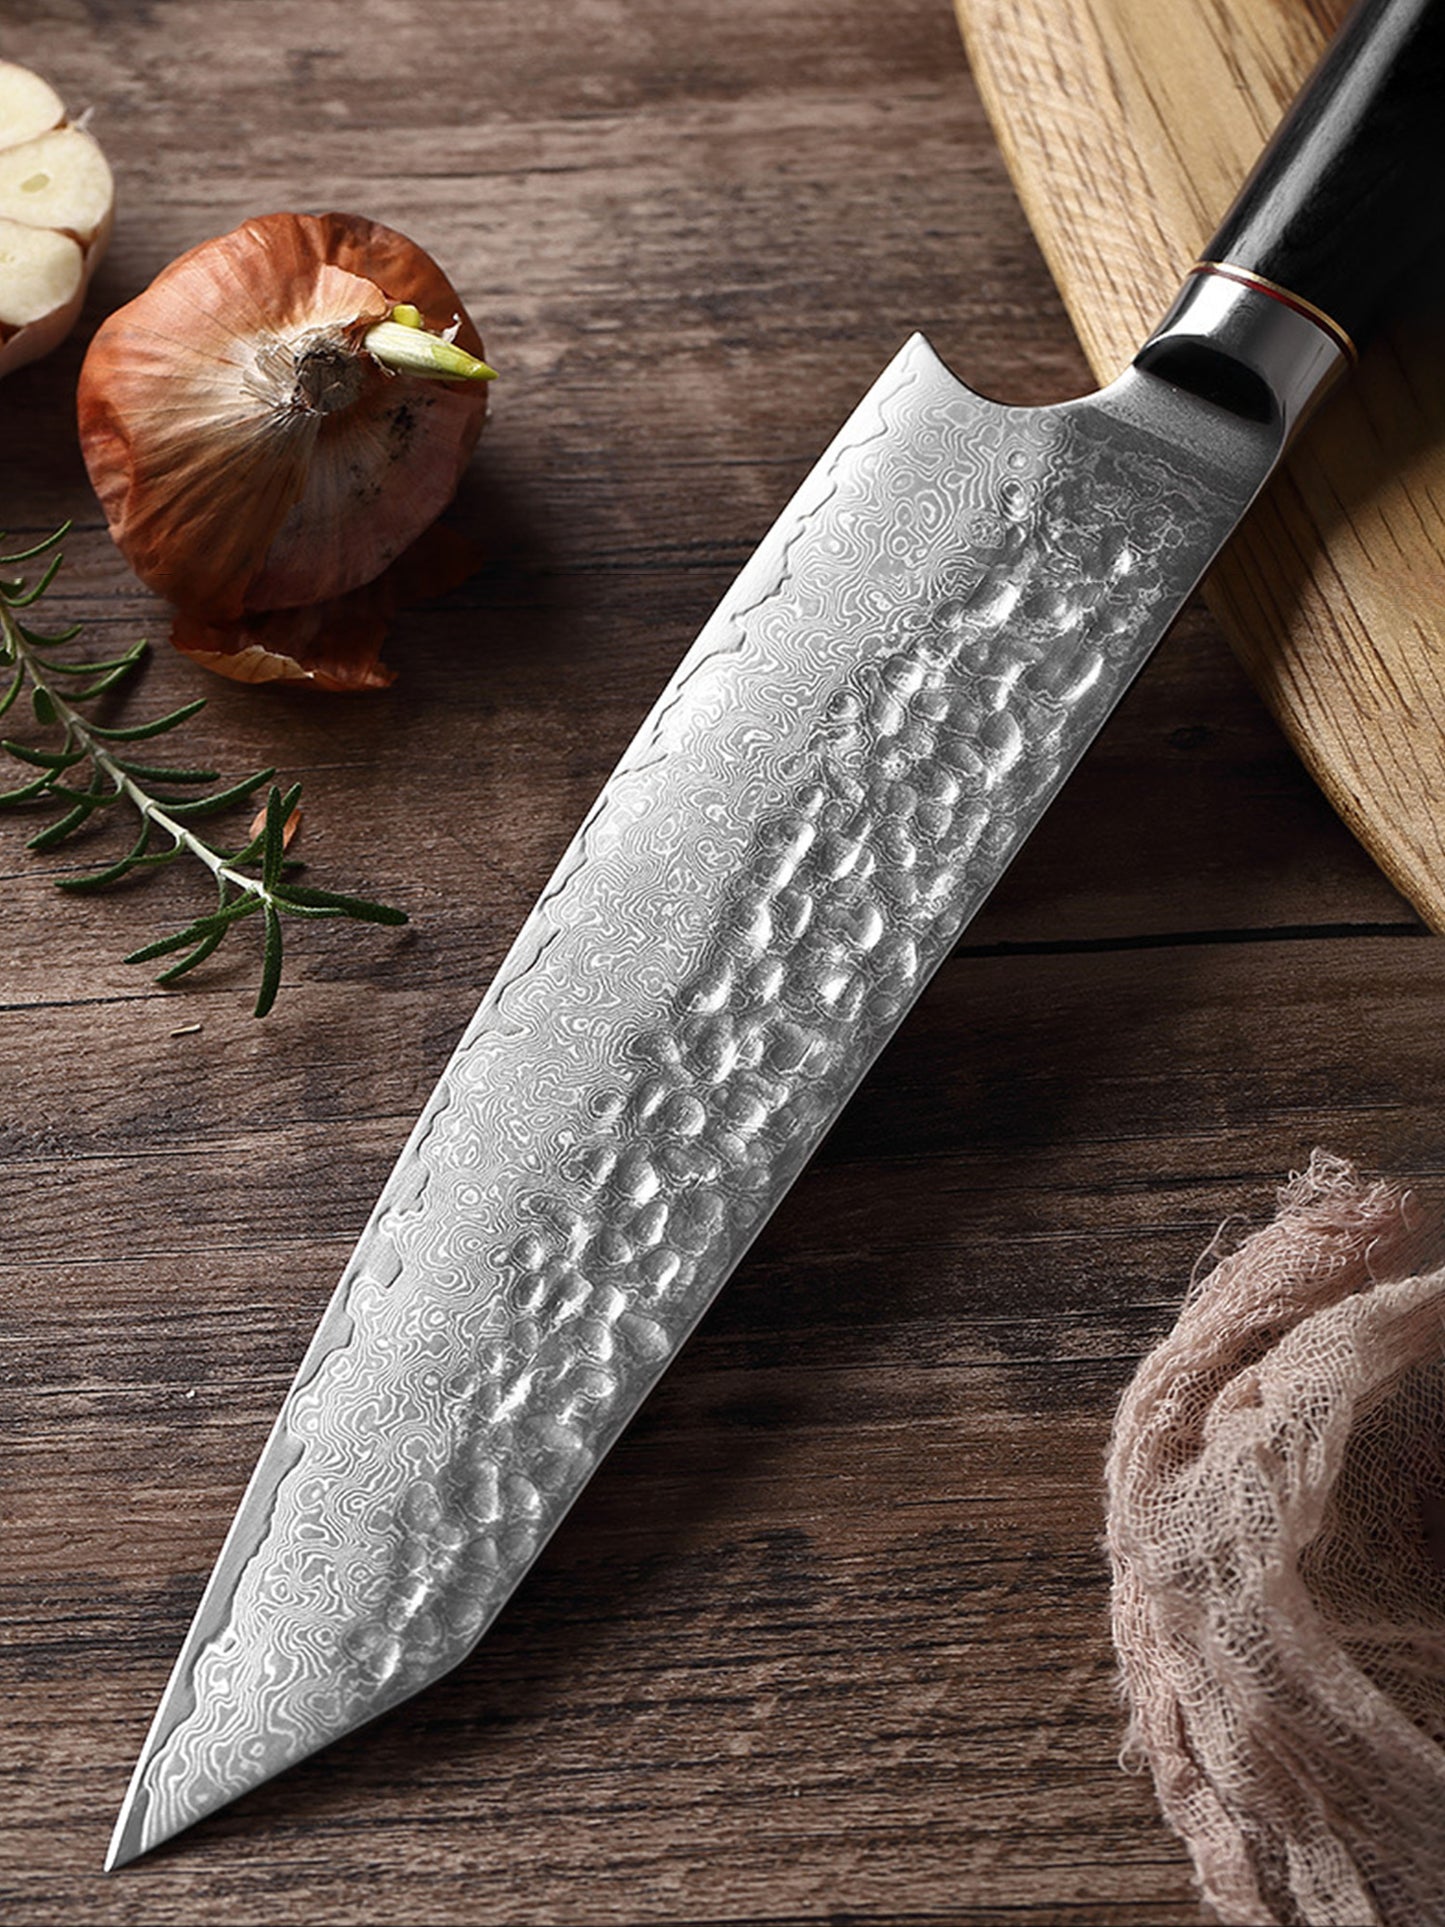 KD 67 layers Forged Damascus Steel Professional sharp Chef Knife